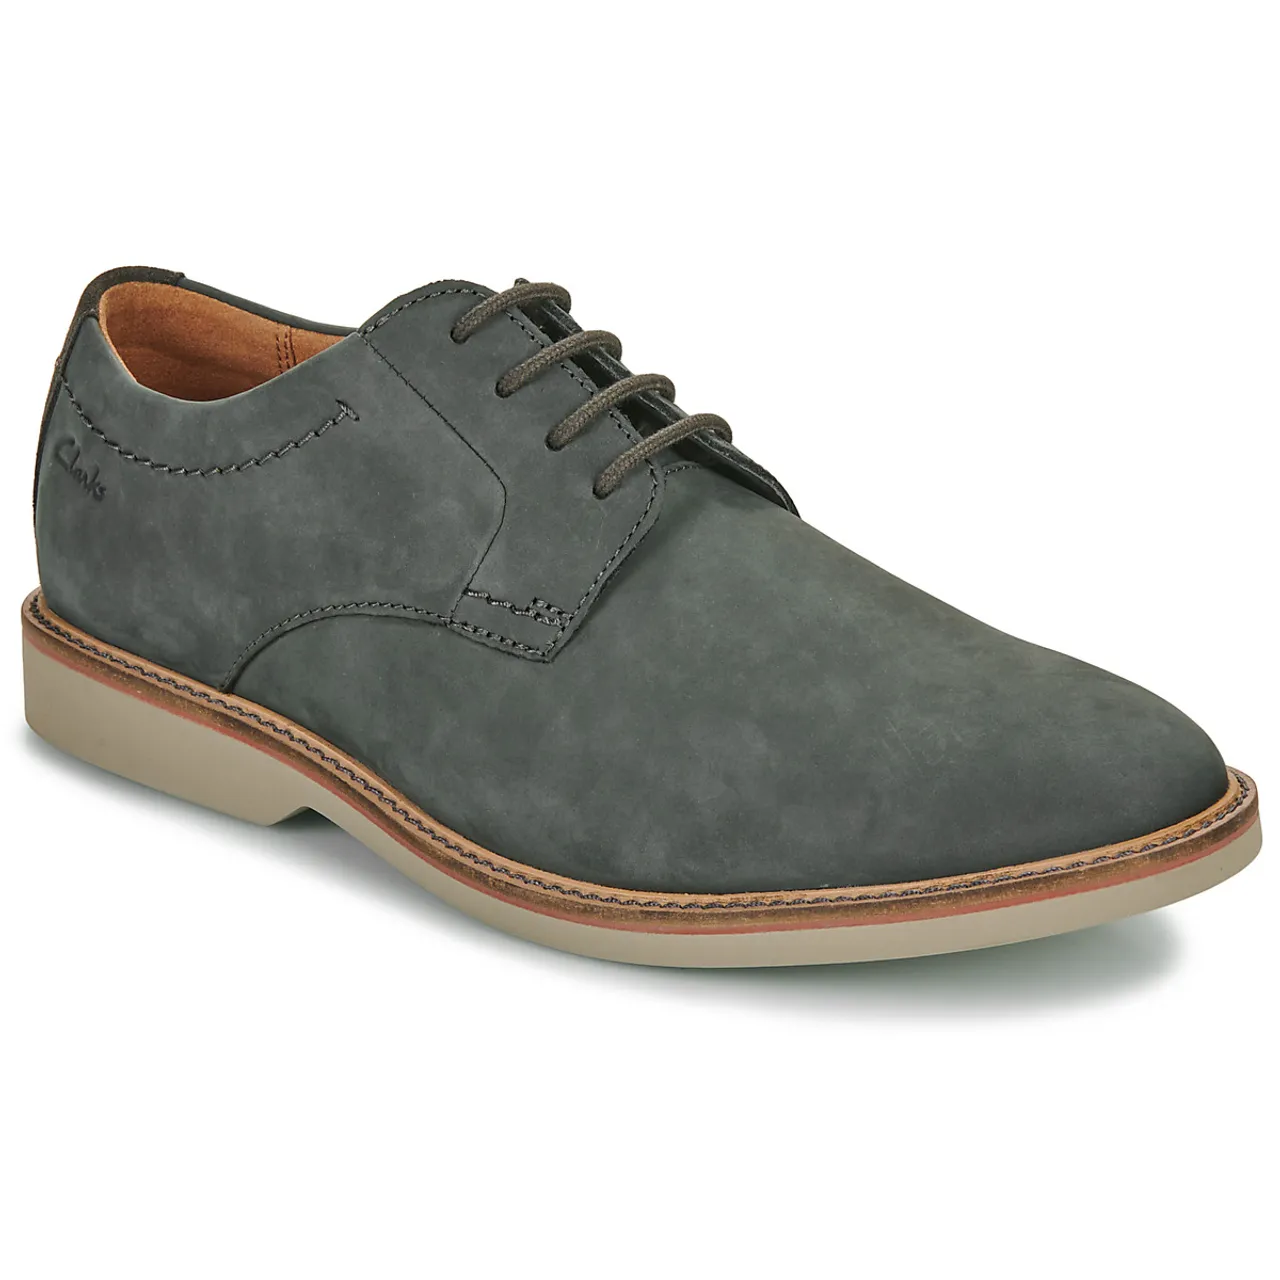 Clarks  ATTICUS LT LACE  men's Casual Shoes in Grey